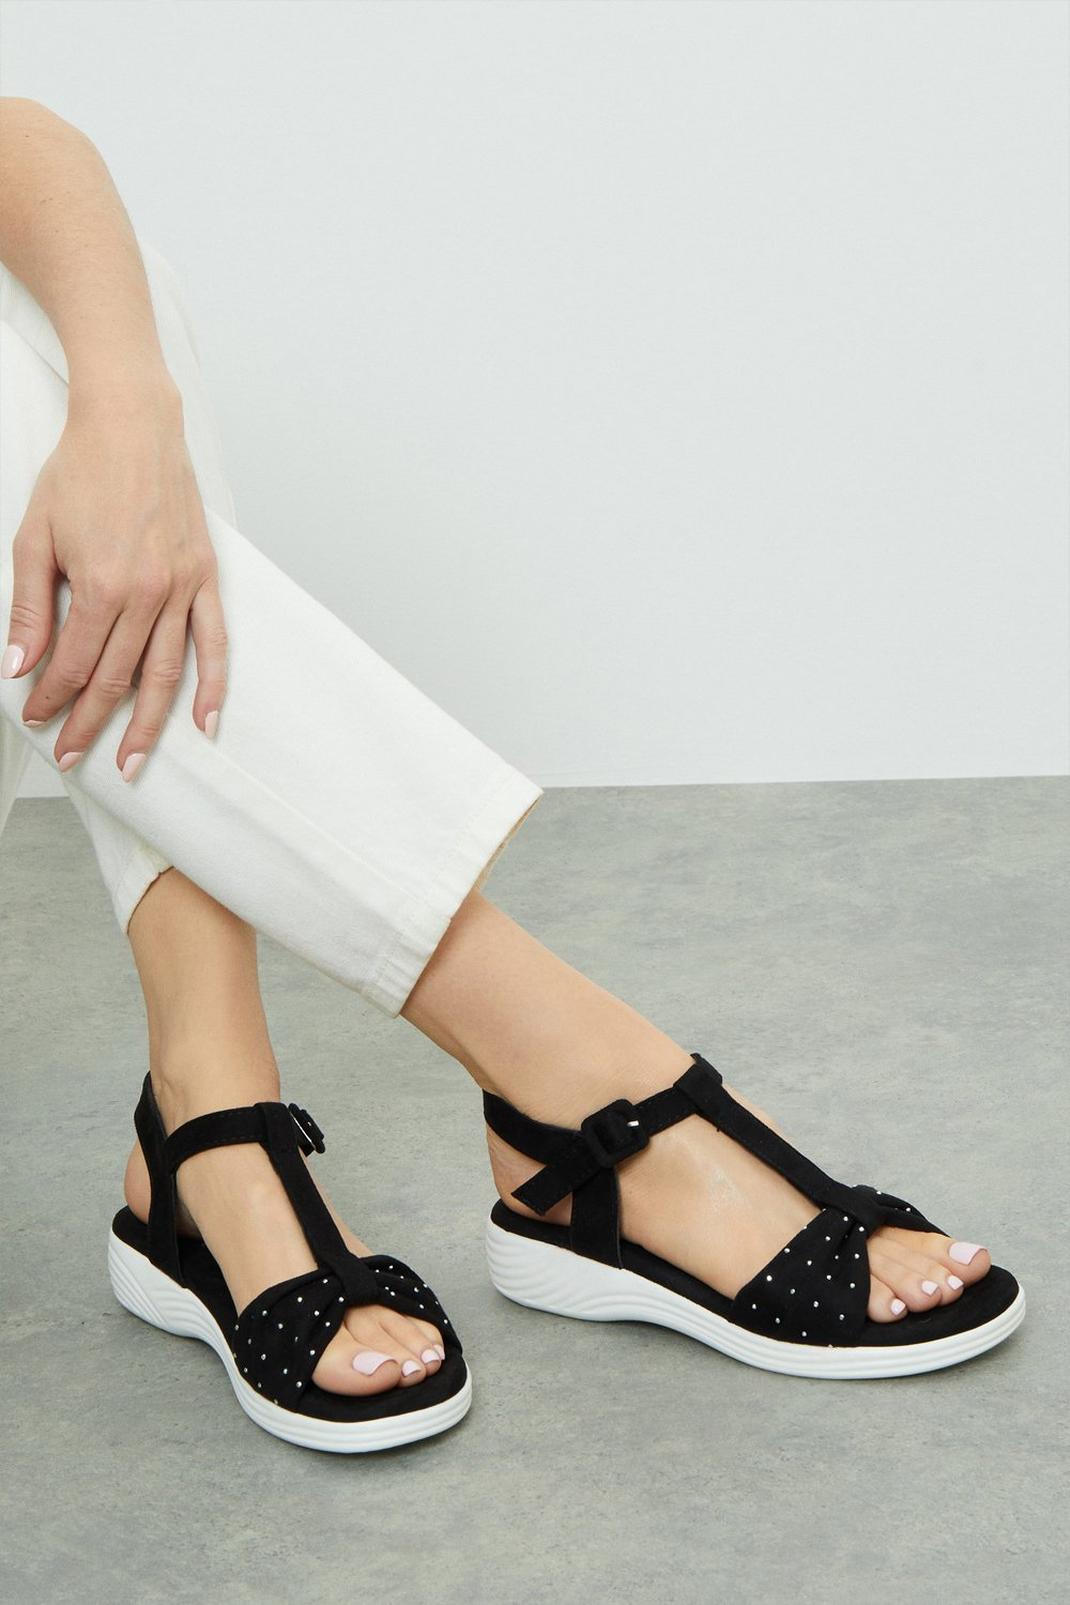 Black Good For The Sole: Amara Wide Fit Knotted T Bar Flat Sandal image number 1